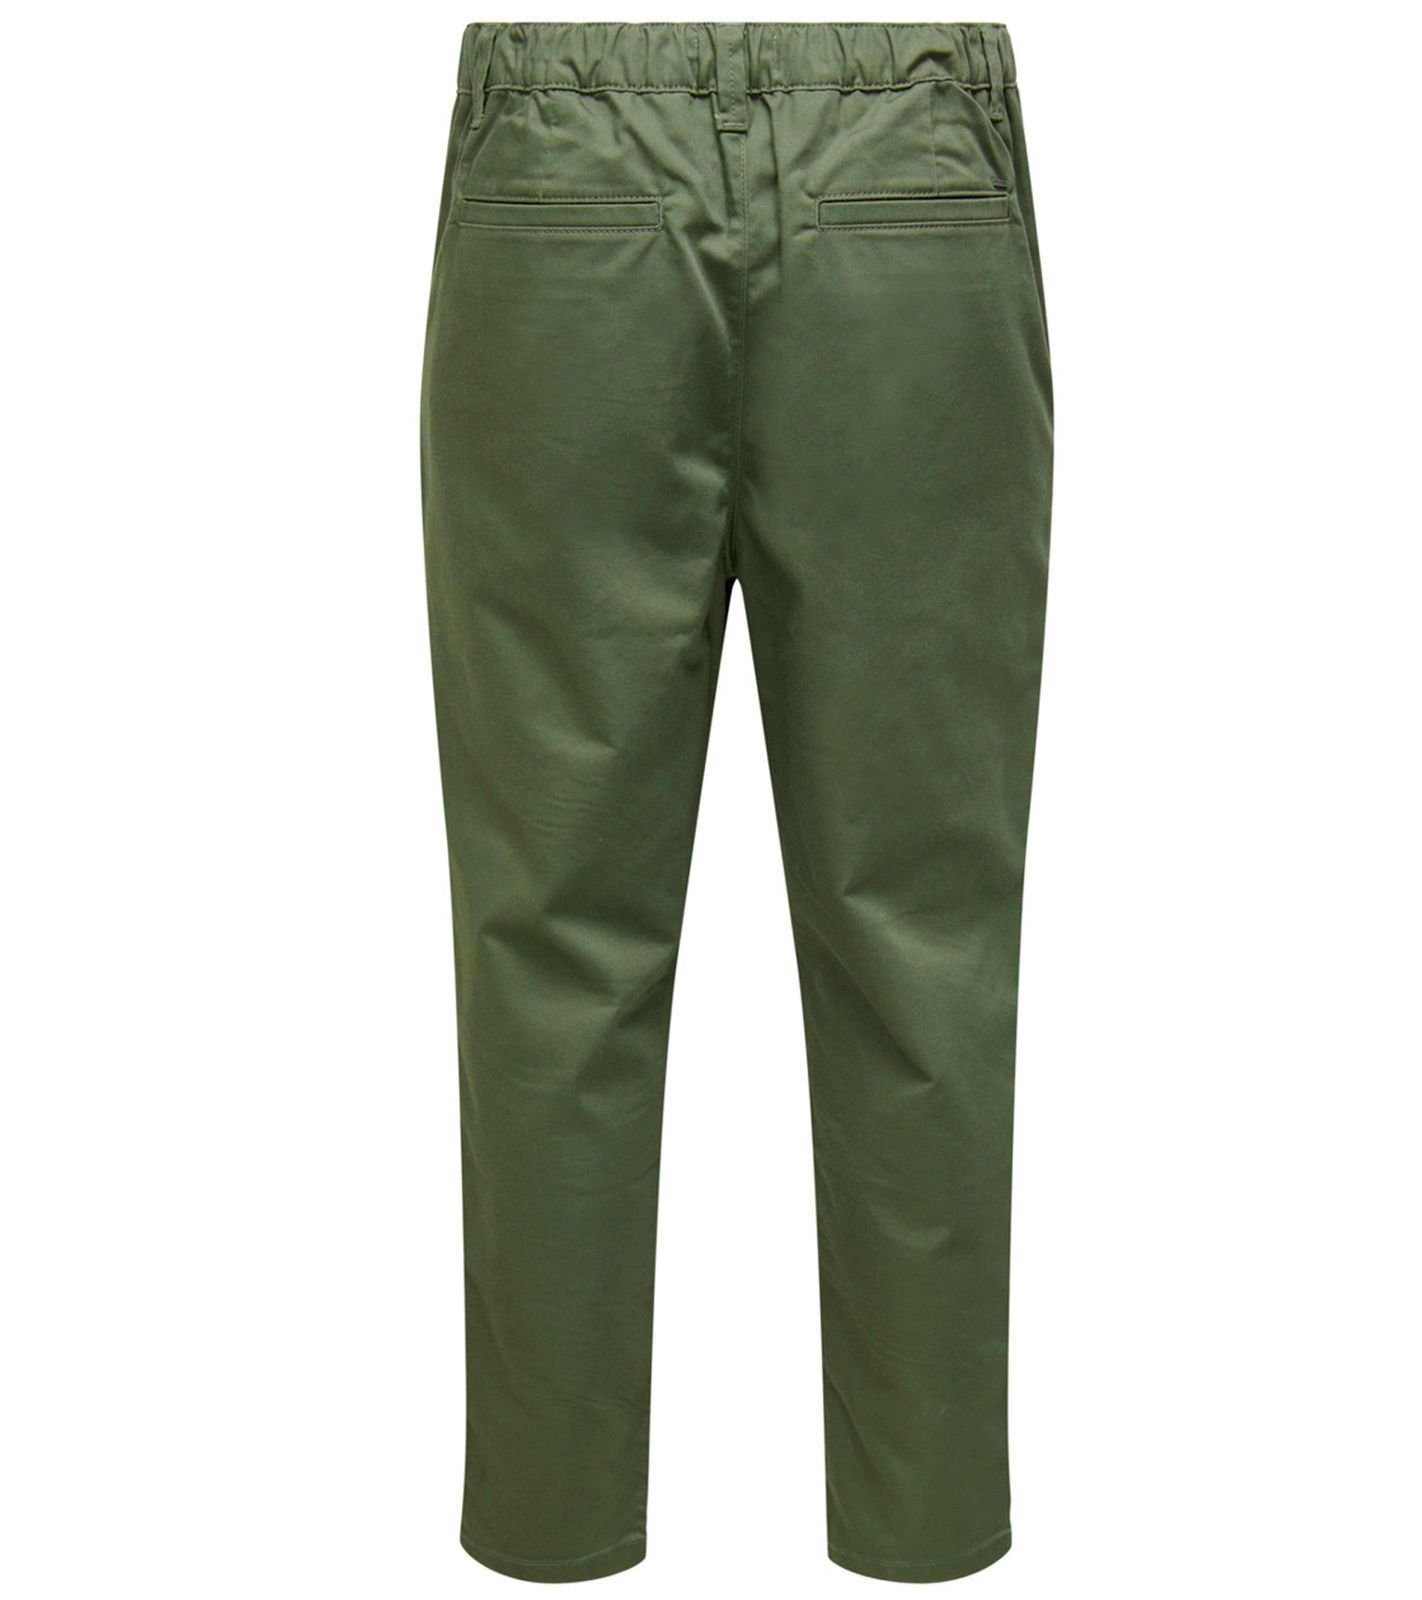 ONLY & SONS Chinohose ONLY SONS Herren Chino-Hose Oliv Freizeit-Hose 22021486 Tapered Stoff-Hose Dew & Grün